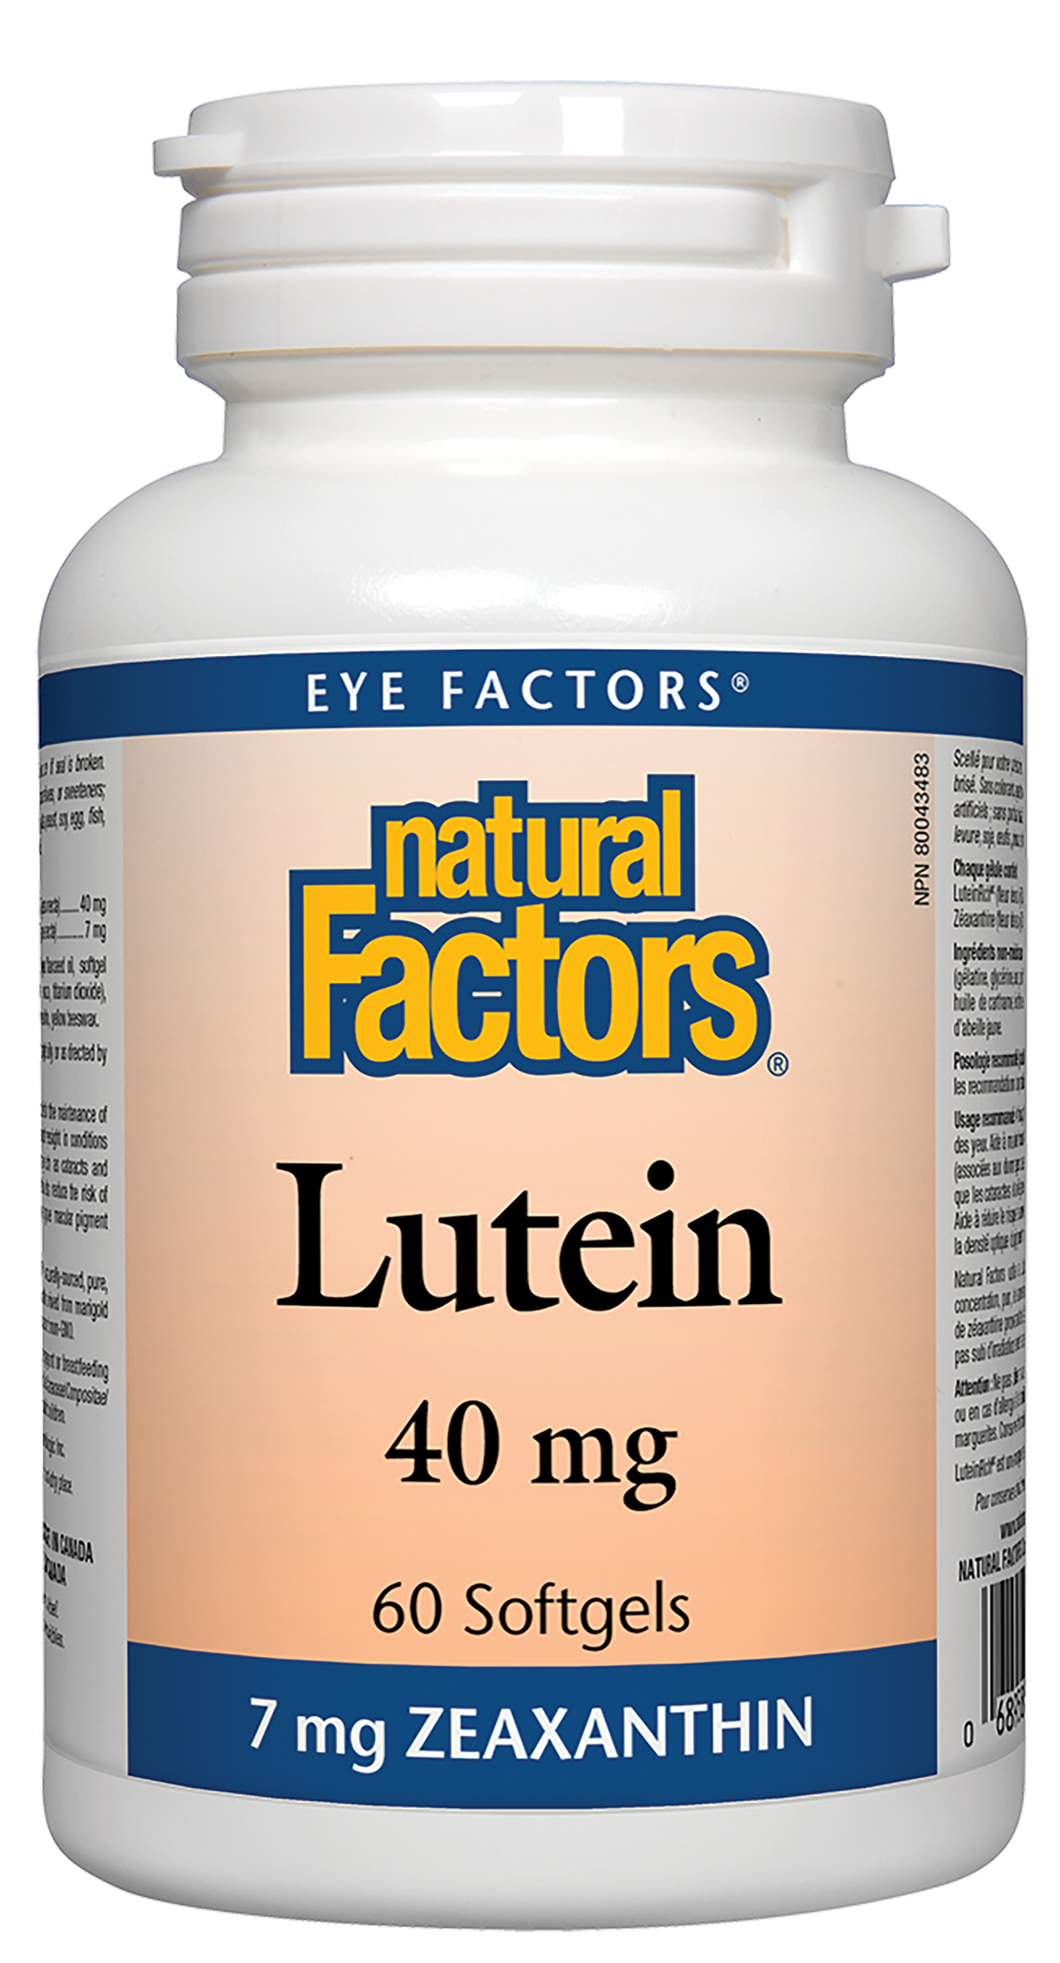 Natural Factors uses LuteinRich™ Antioxidant for eye health.  Lutein and zeaxanthin are carotenoid antioxidants that are concentrated in the eyes, where they protect the lens and retina from damage caused by toxic free radicals and exposure to sunlight. Natural Factors uses LuteinRich™, naturally sourced, pure, high-potency lutein and zeaxanthin derived from marigold petals. LuteinRich is non-irradiated and GMO-free.